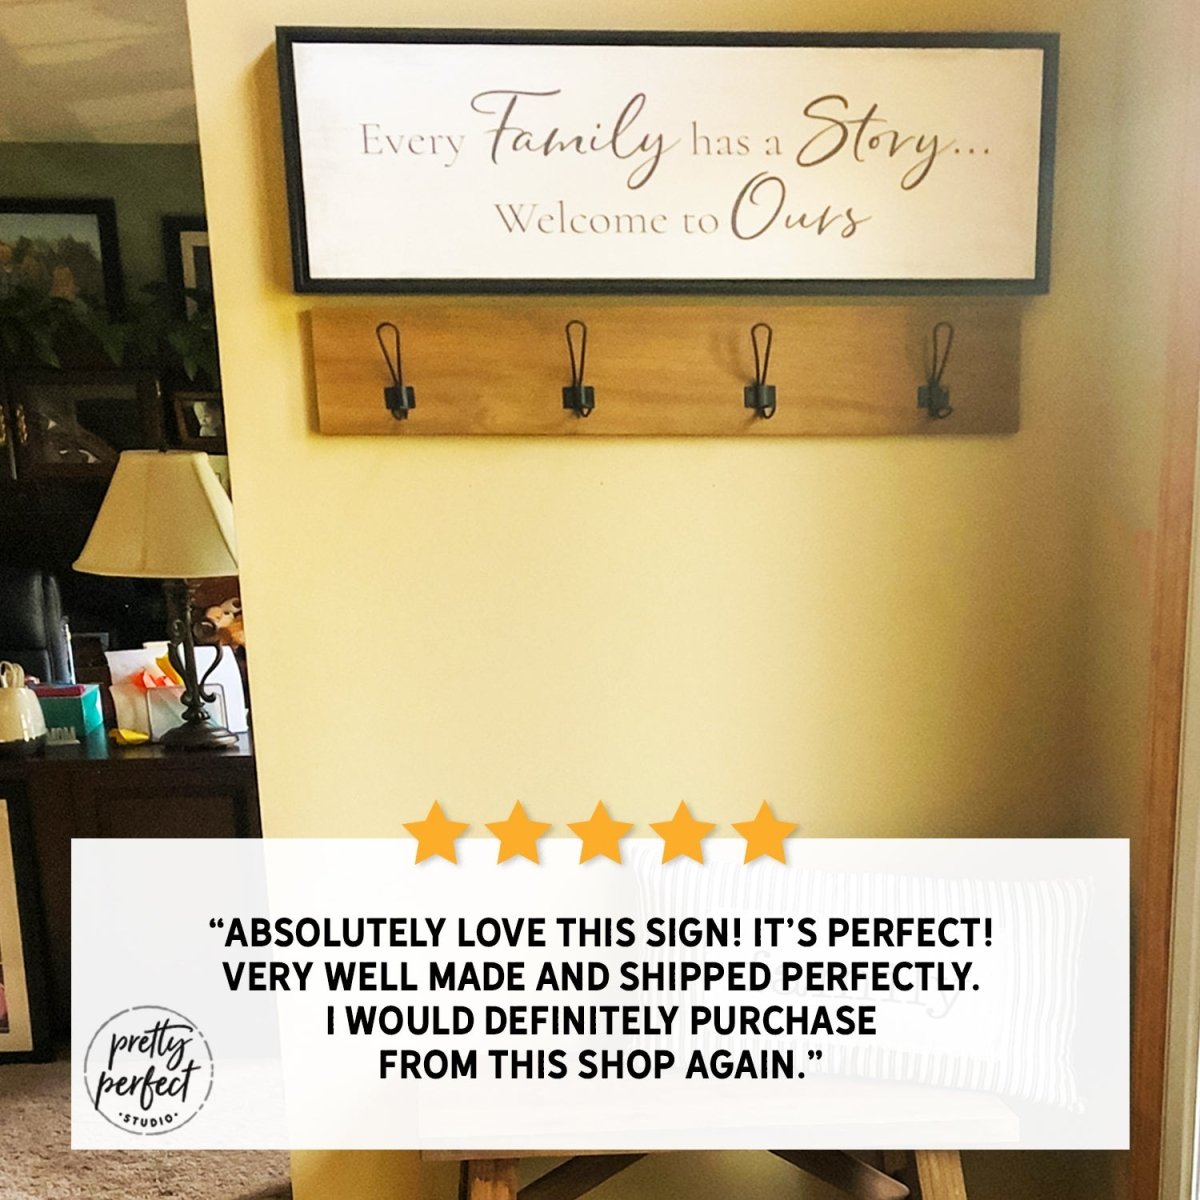 Every Family Has a Story Sign - Pretty Perfect Studio